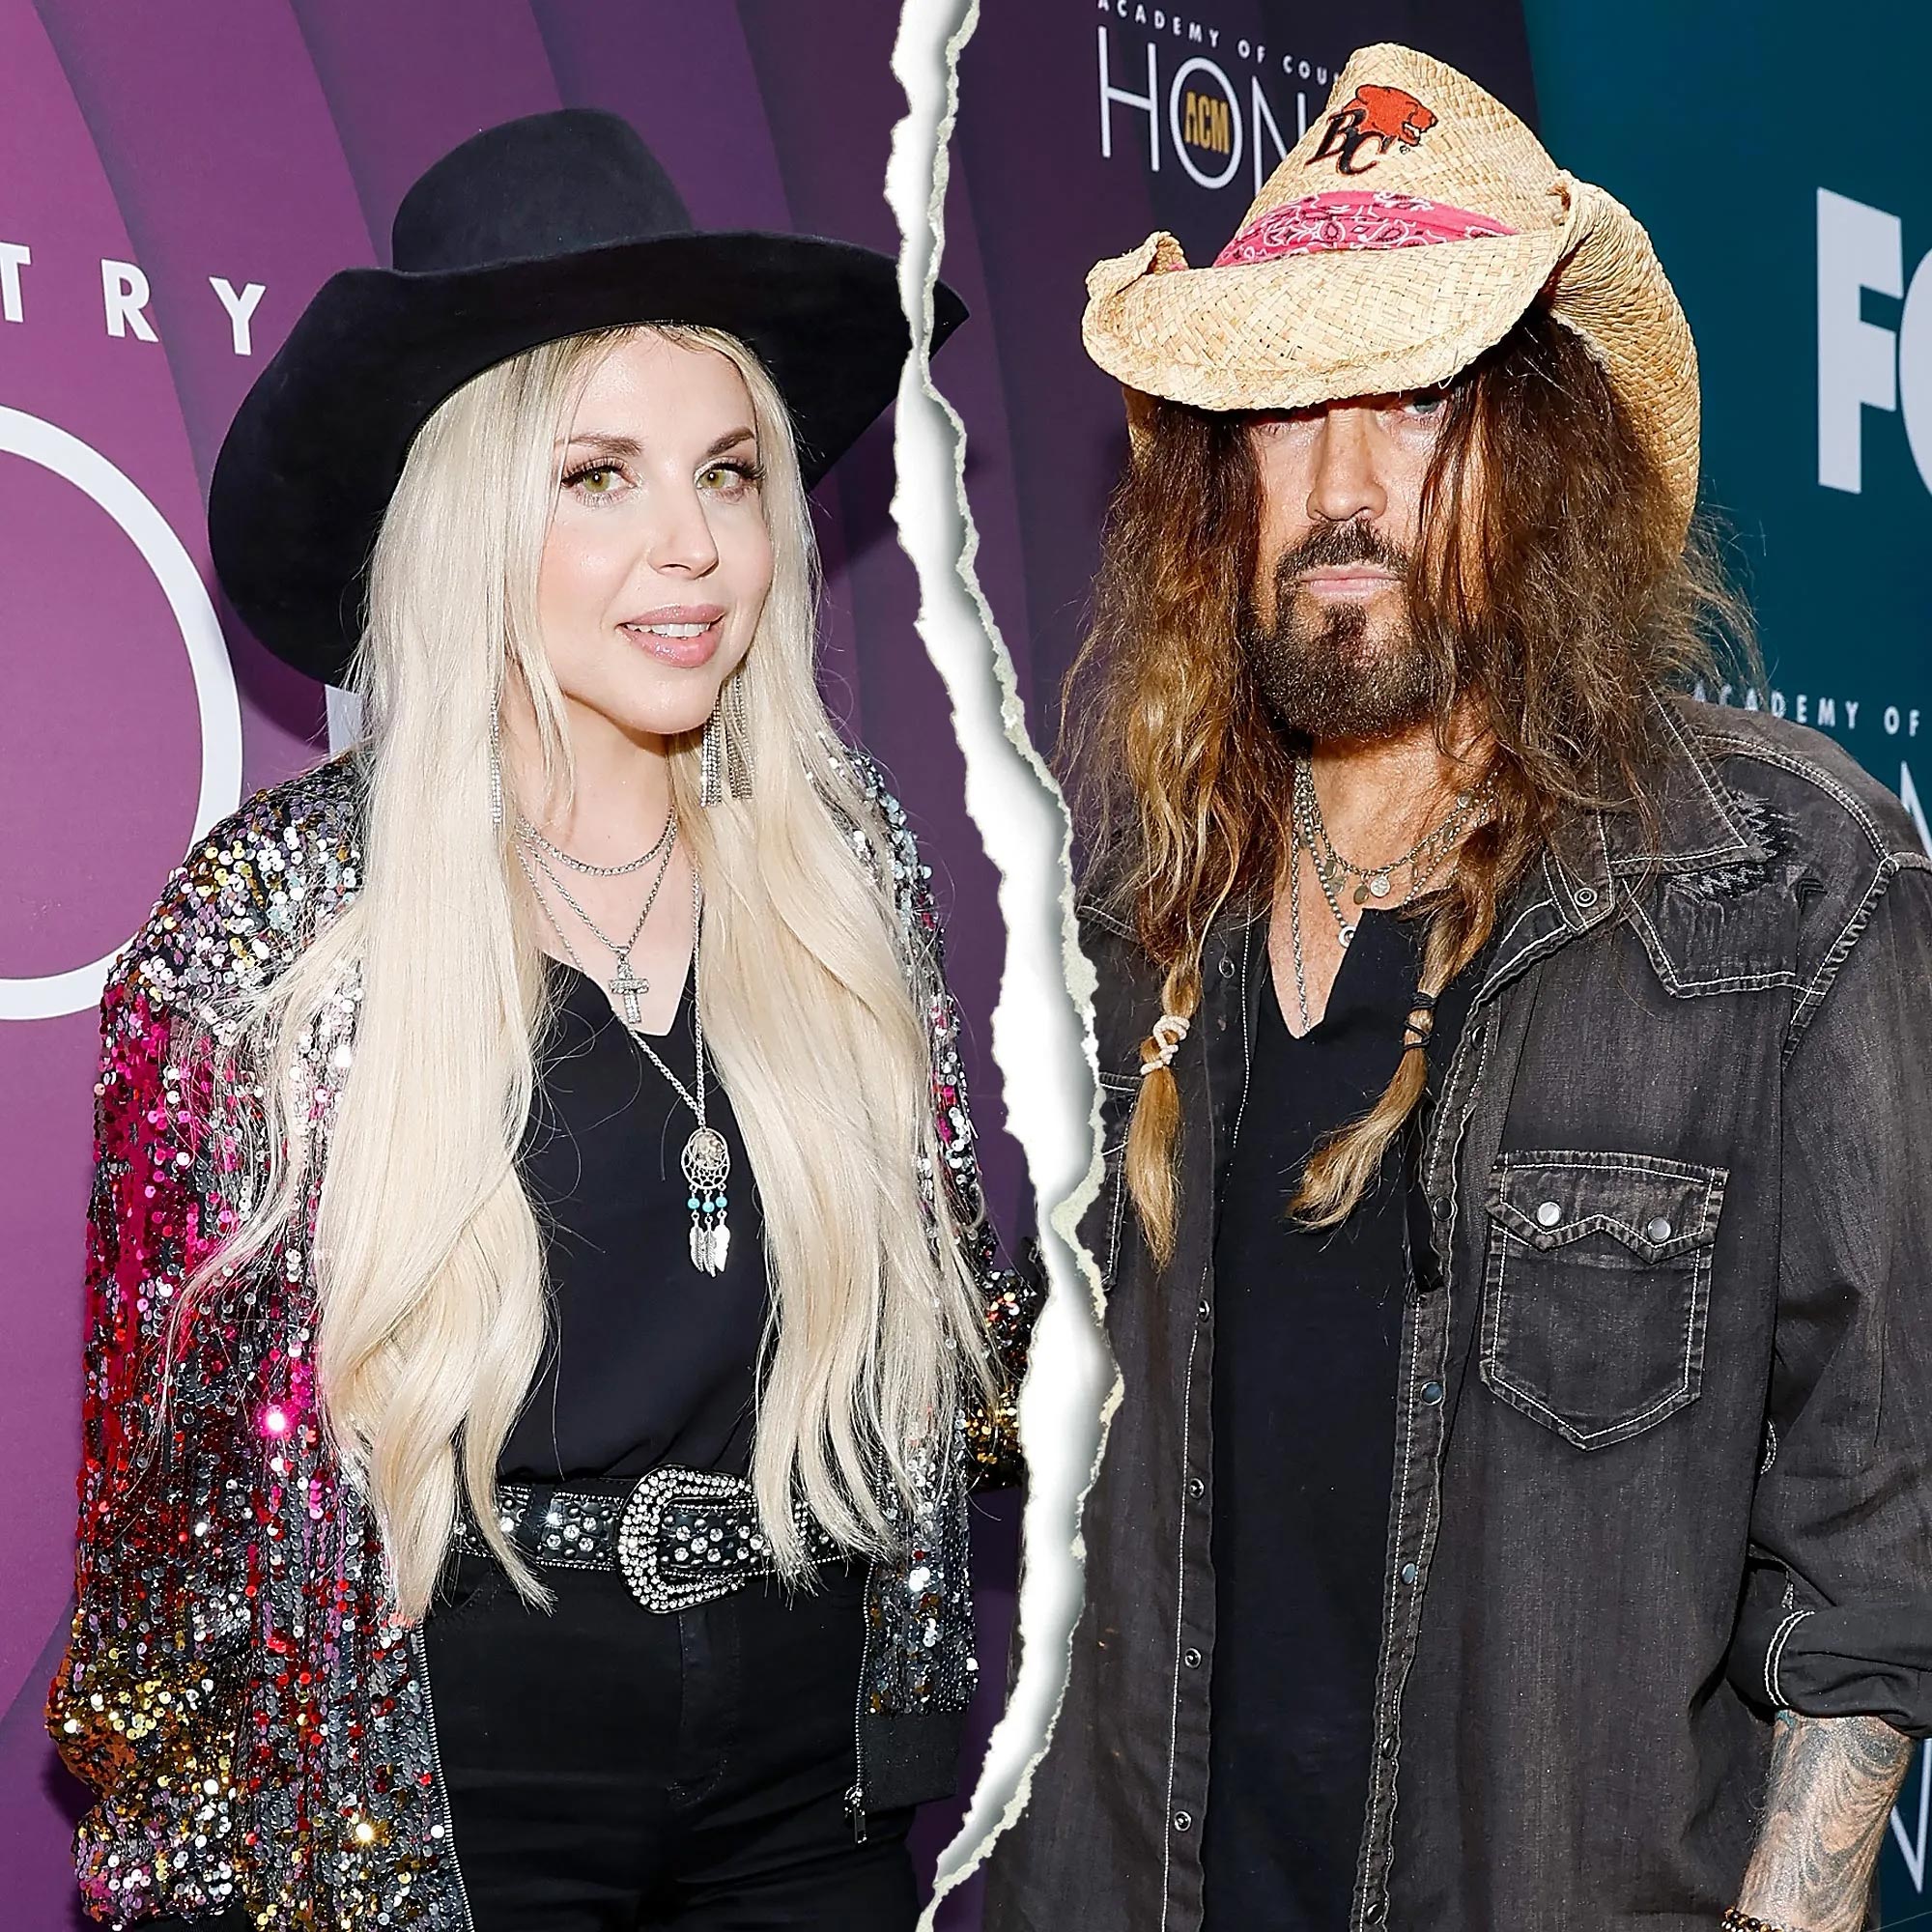 Billy Ray Cyrus and Wife Firerose Split, He Files for Annulment